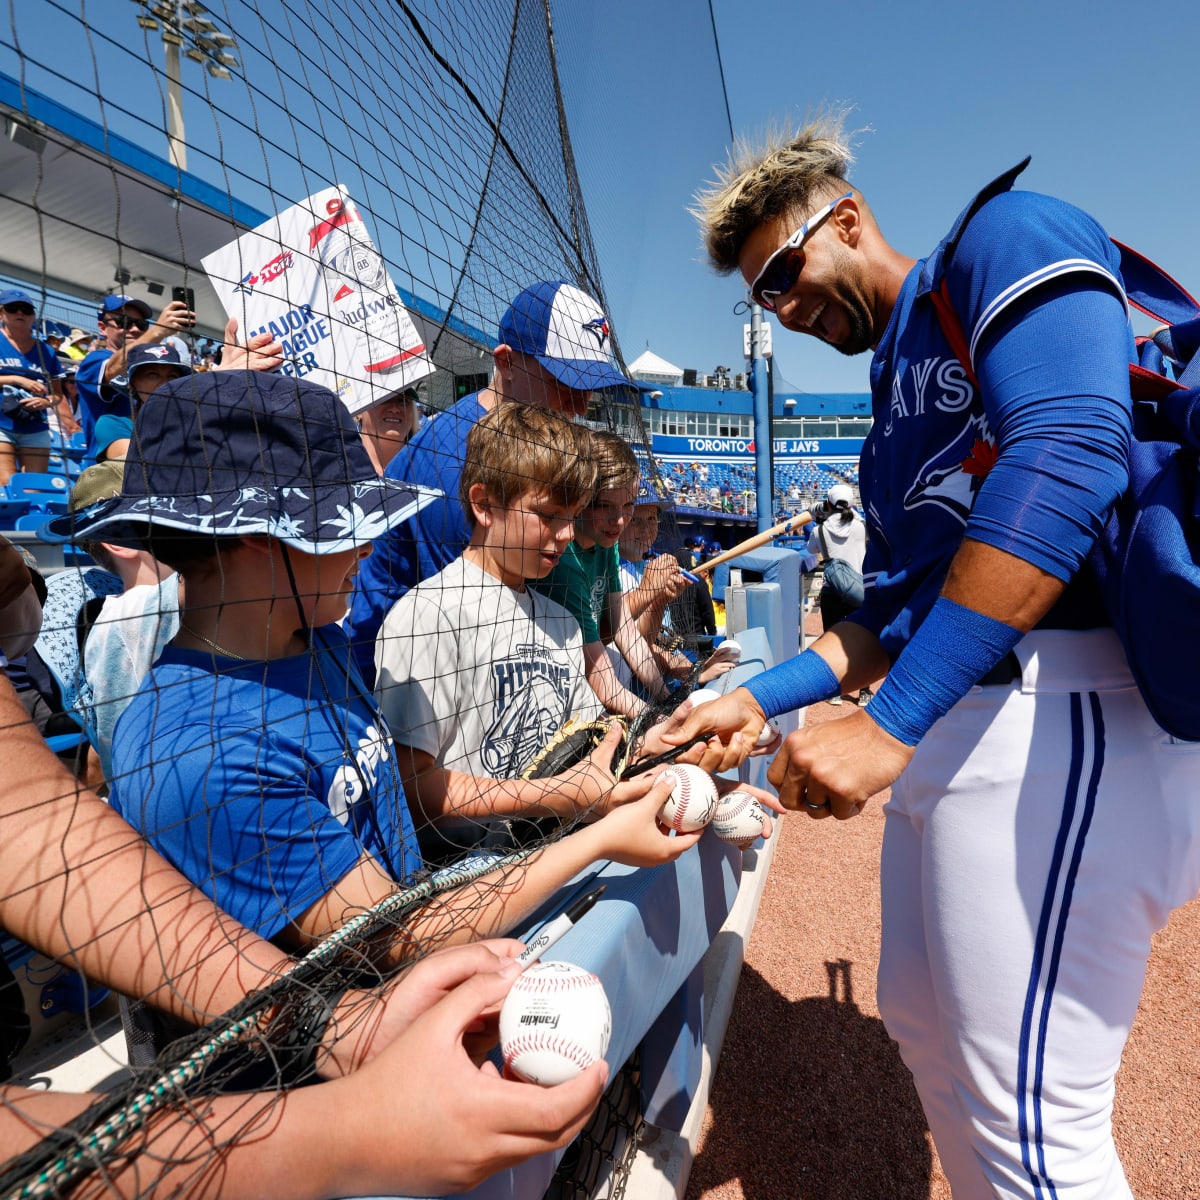 Blue Jays Players Told 'Not to Rush' Spring Training Accommodations Amidst  MLB Lockout - Sports Illustrated Toronto Blue Jays News, Analysis and More